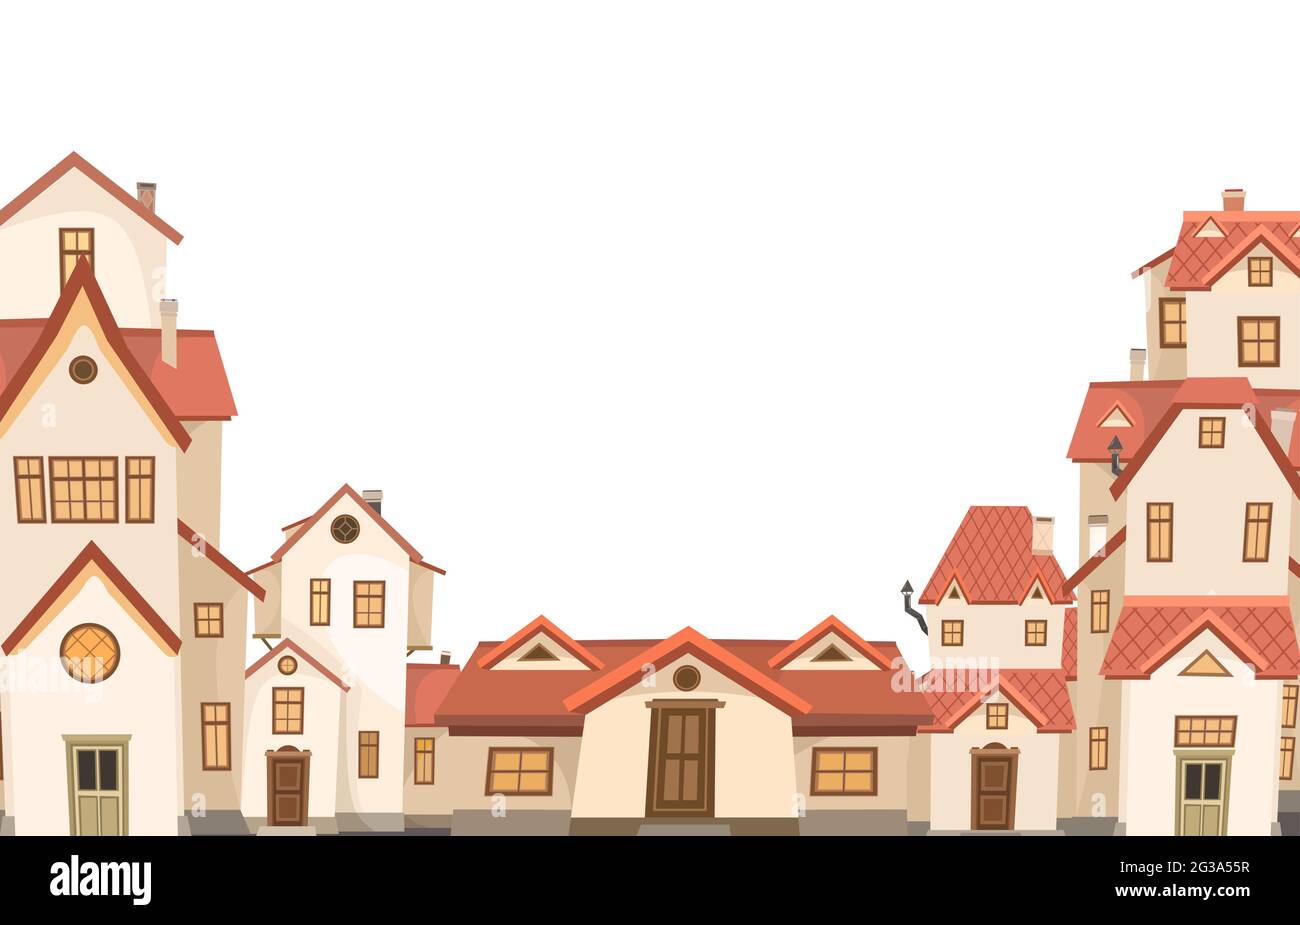 Cartoon houses with red roofs. Village or town. Frame. A beautiful, cozy country house in a traditional European style. Nice funny home. Rural Stock Vector